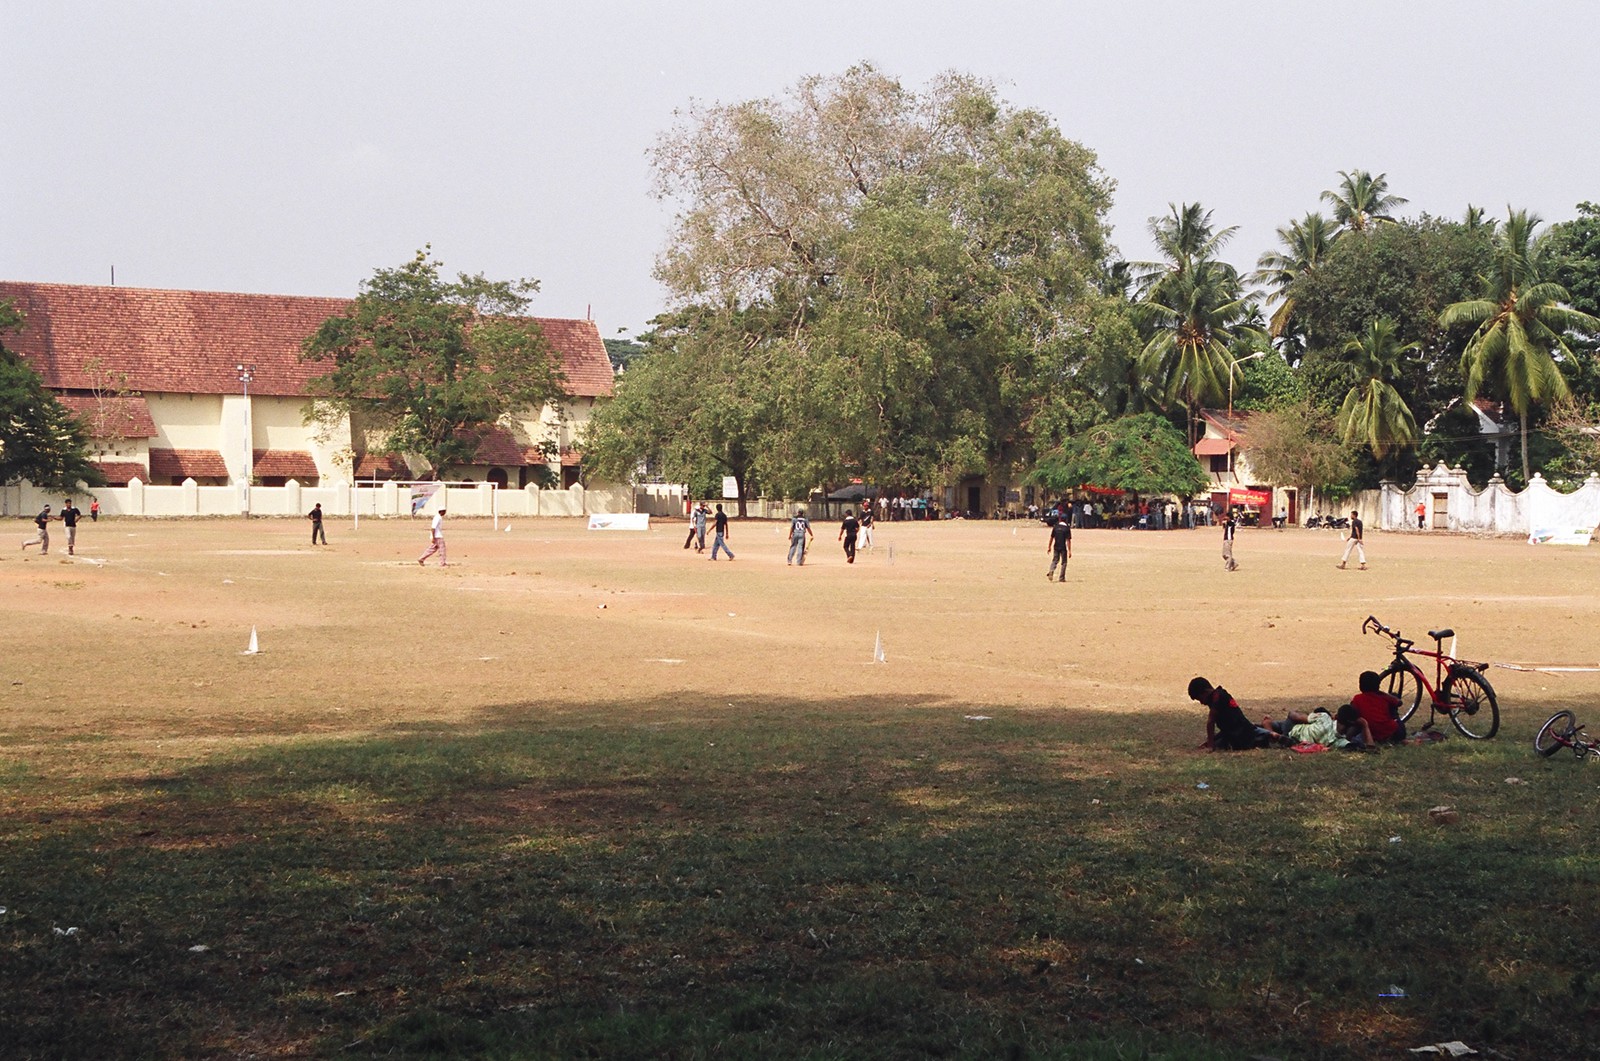 Cricket on the green in front of St Francis' Church